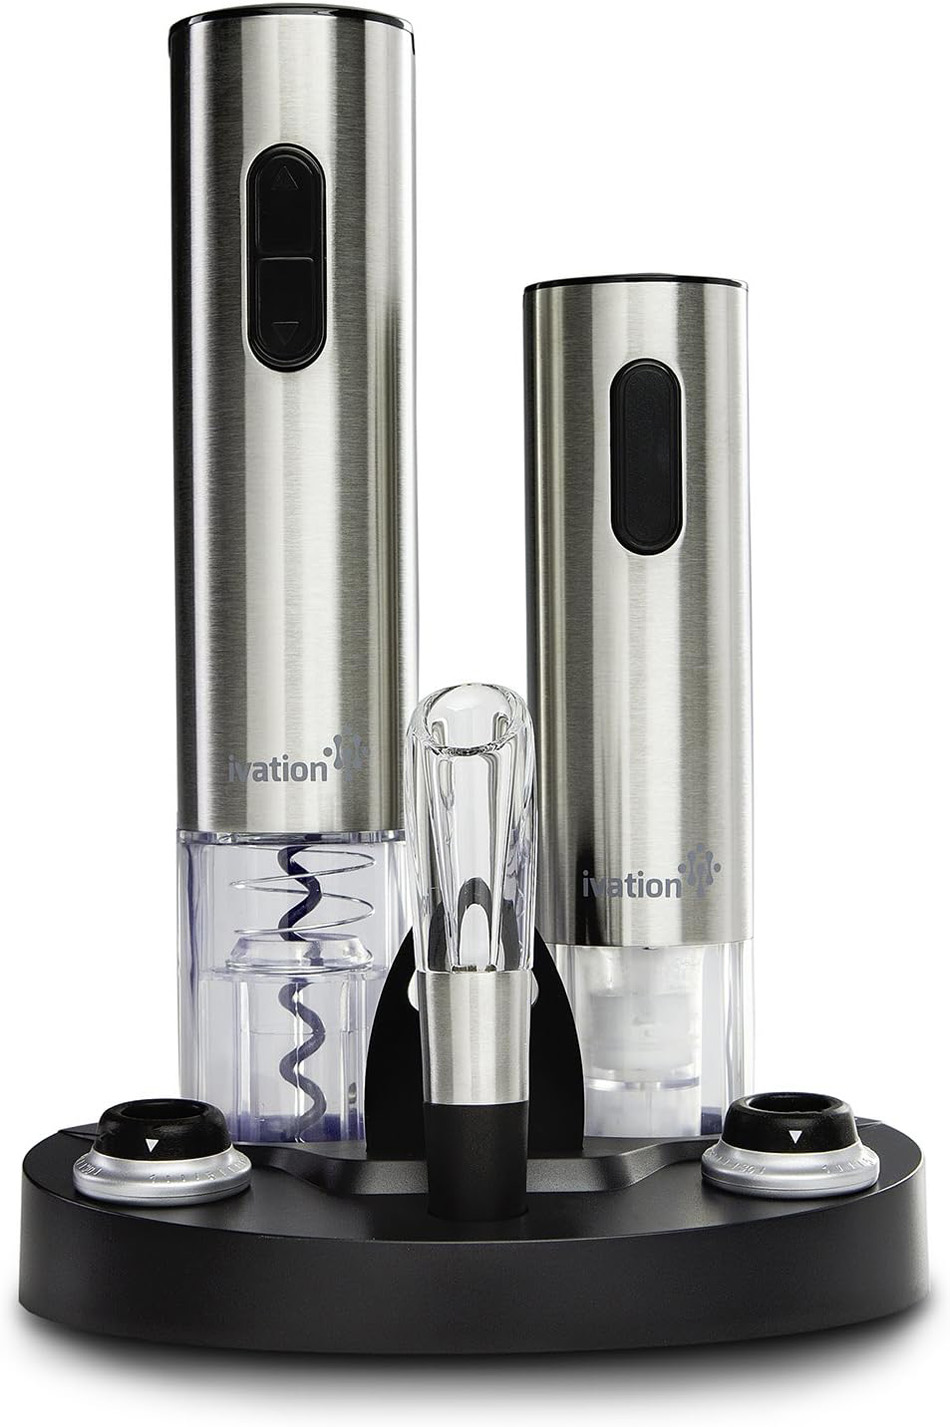 Ivation Wine Gift Set, Includes Stainless Steel Electric Wine Bottle Opener